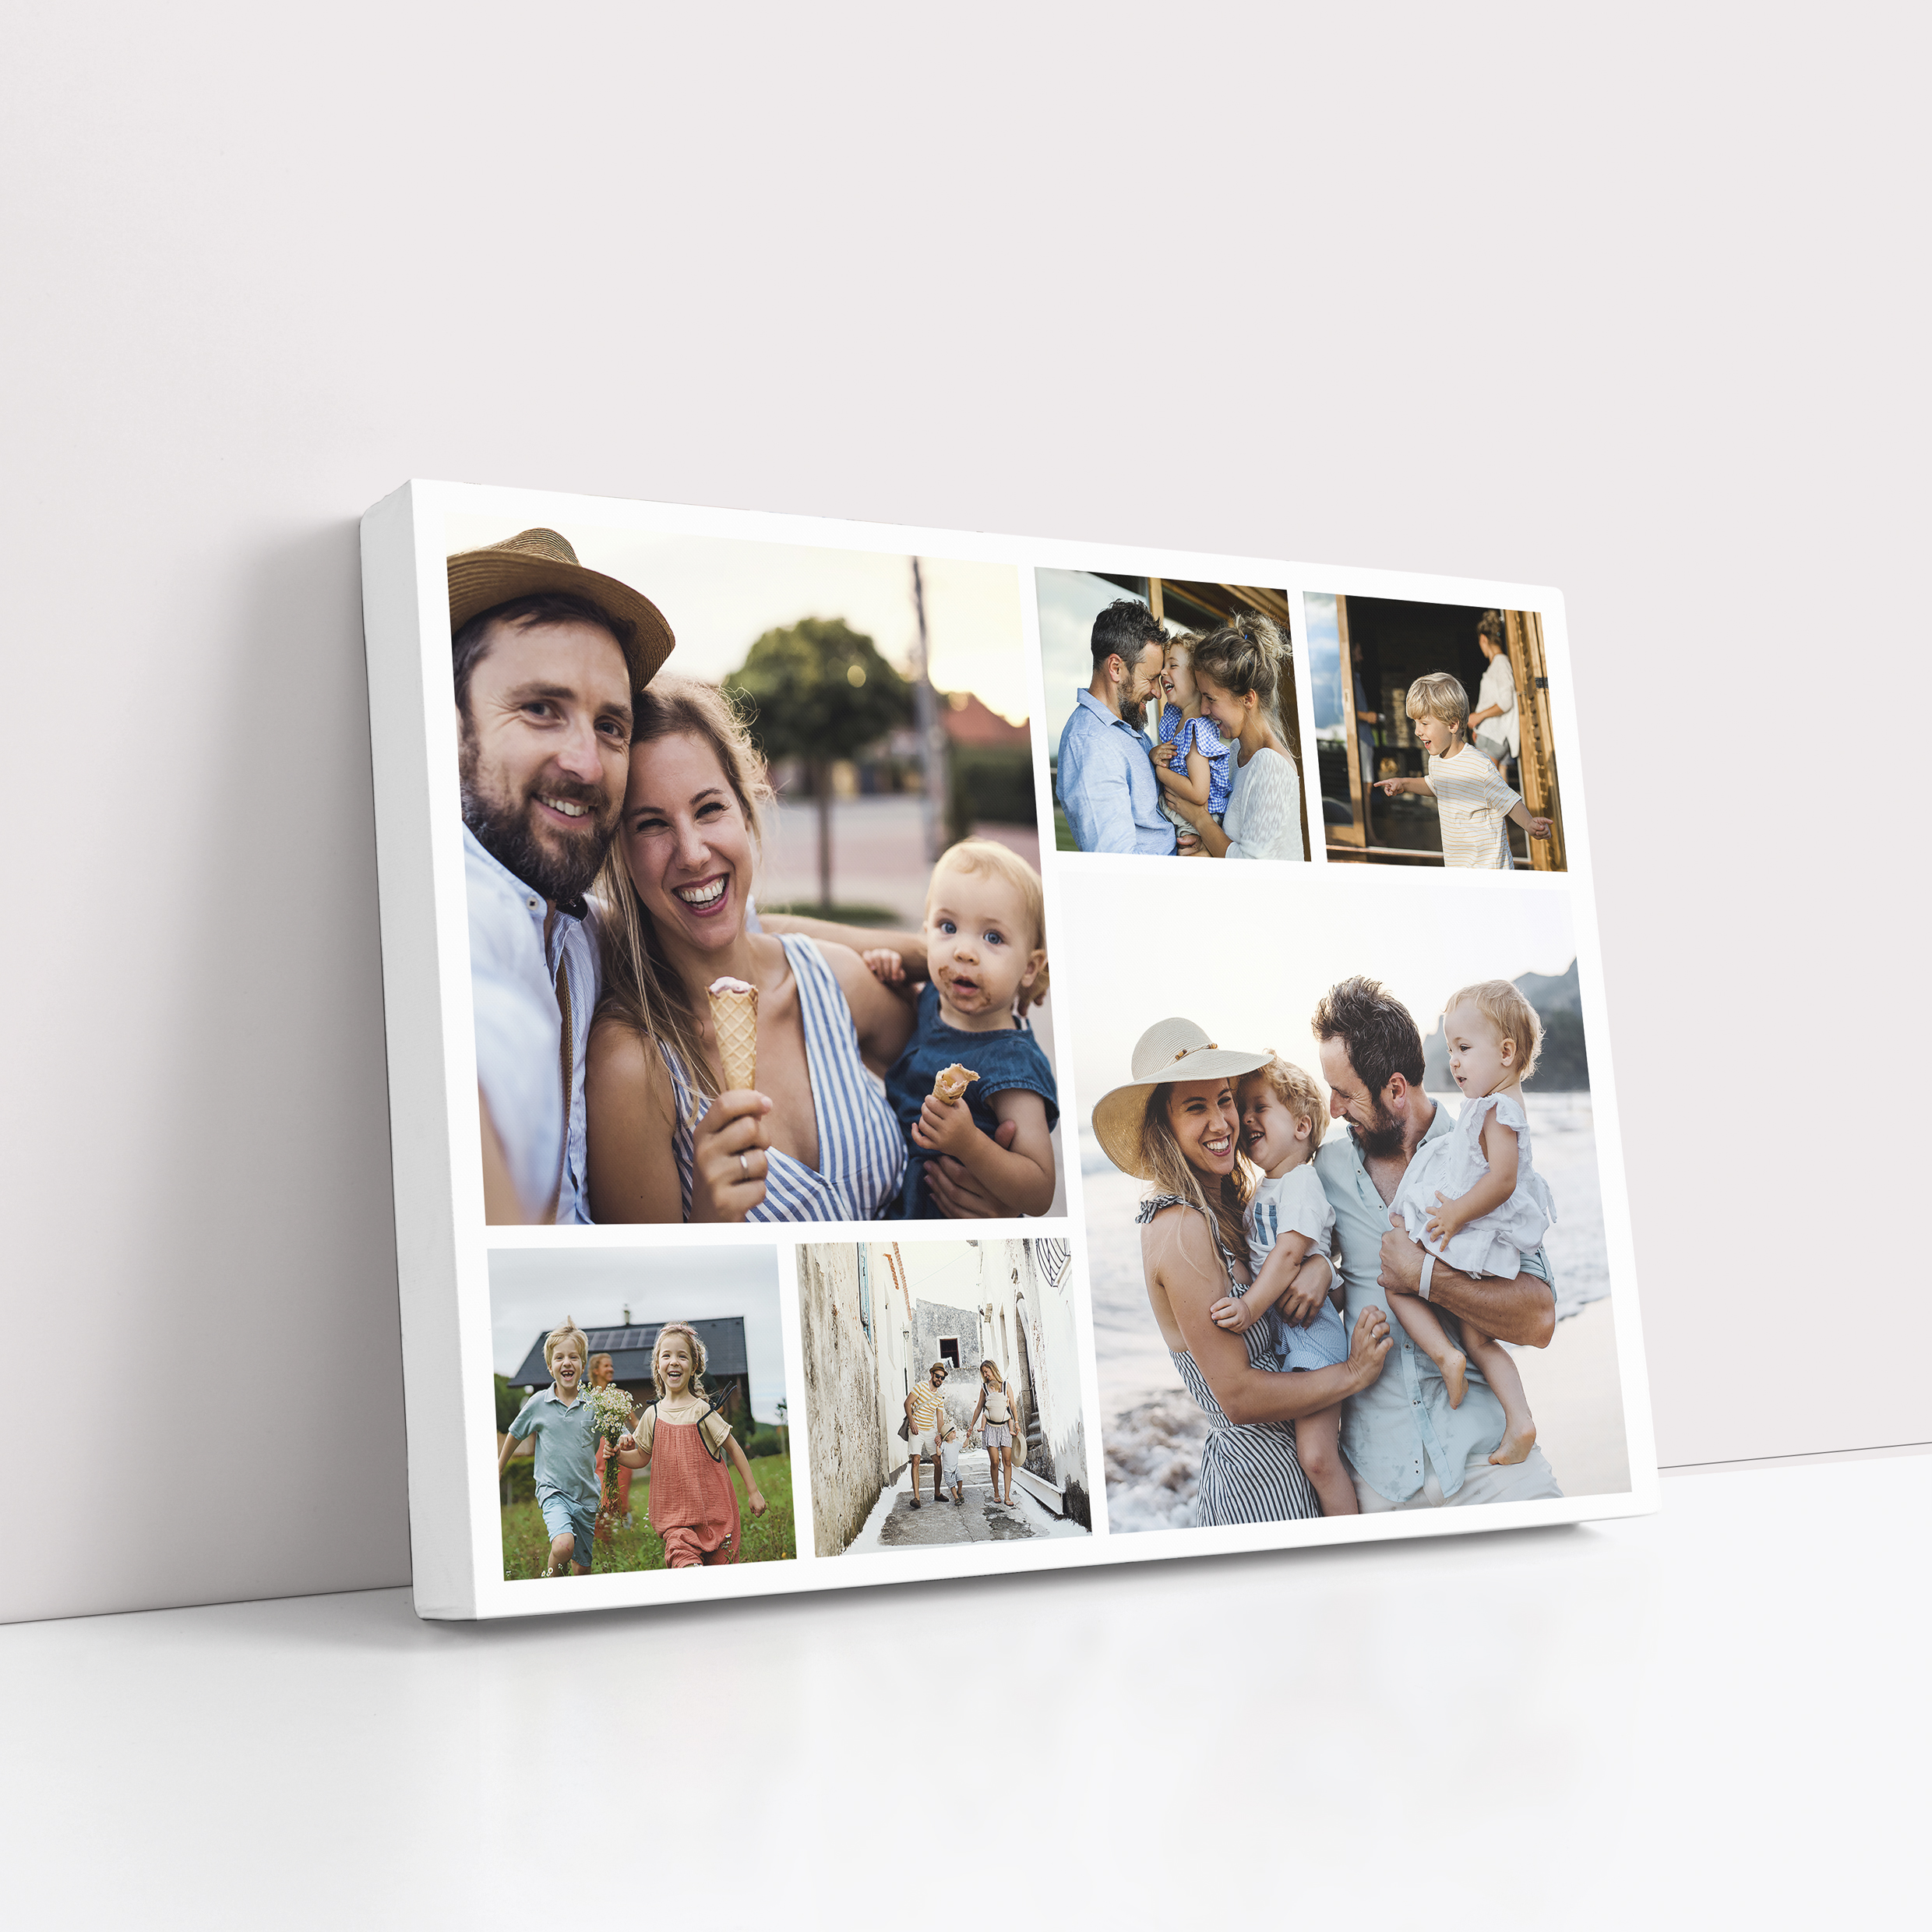 Valentine's Mosaic Personalised Stretch Canvas Print - A heartfelt canvas featuring six photos in a mosaic pattern, capturing the essence of love and joyful moments.